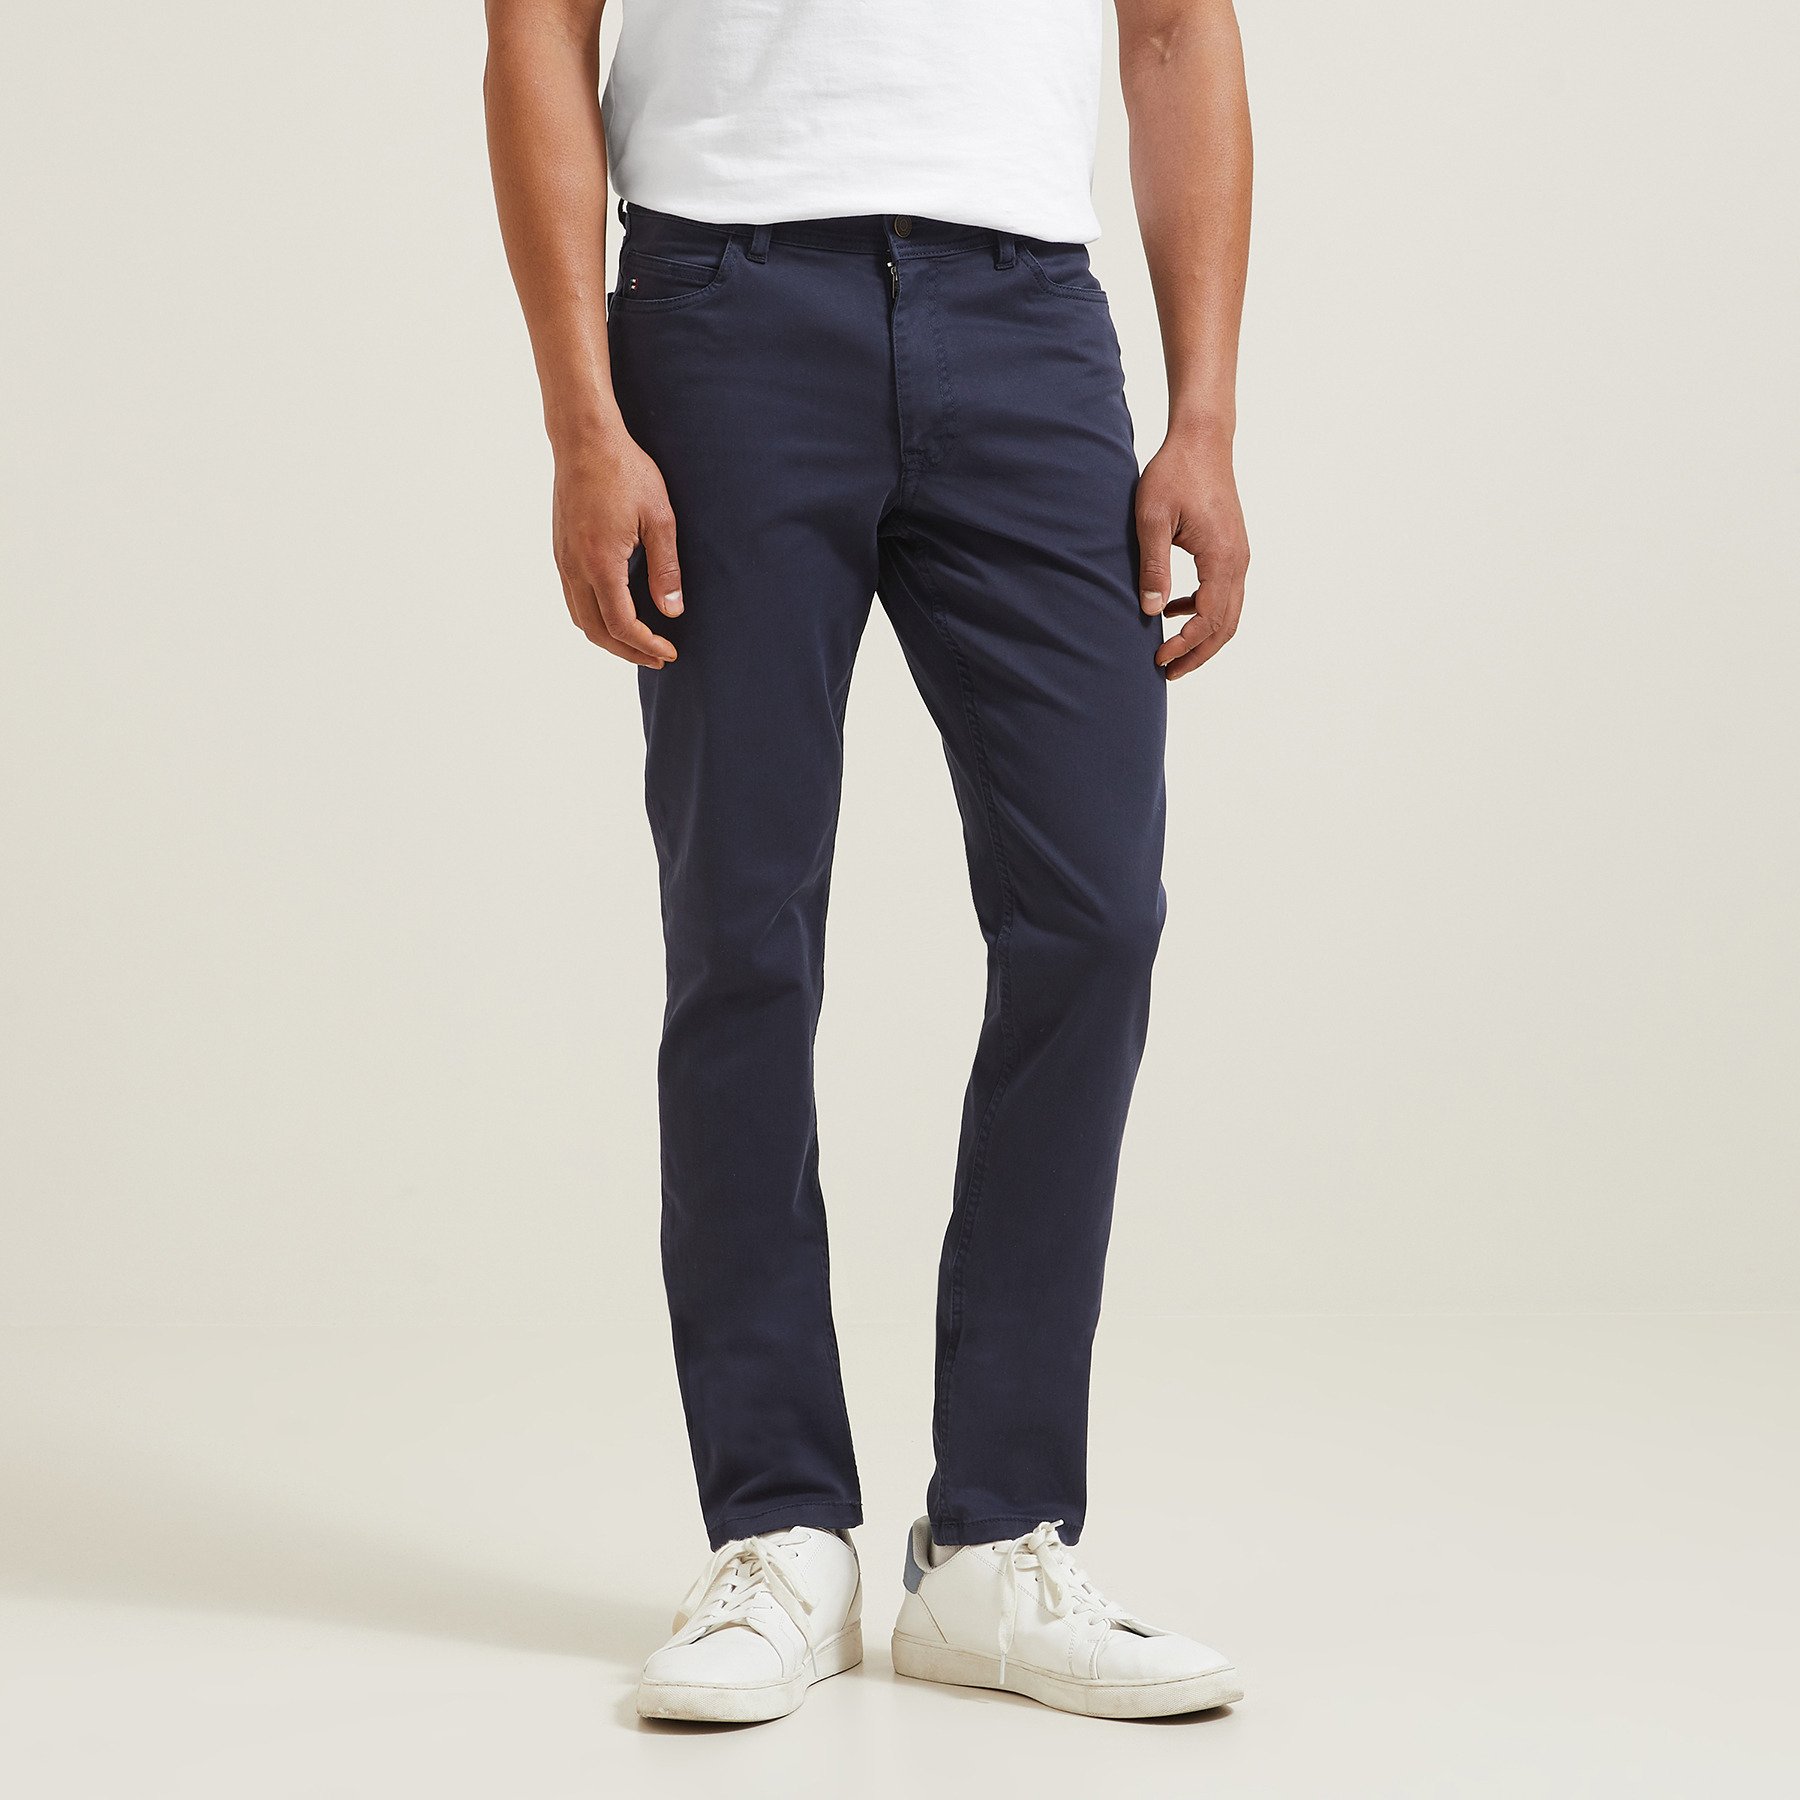 Pantalon 5 poches Made in France Bleu 36 97% Coton, 3% Elasthanne Homme